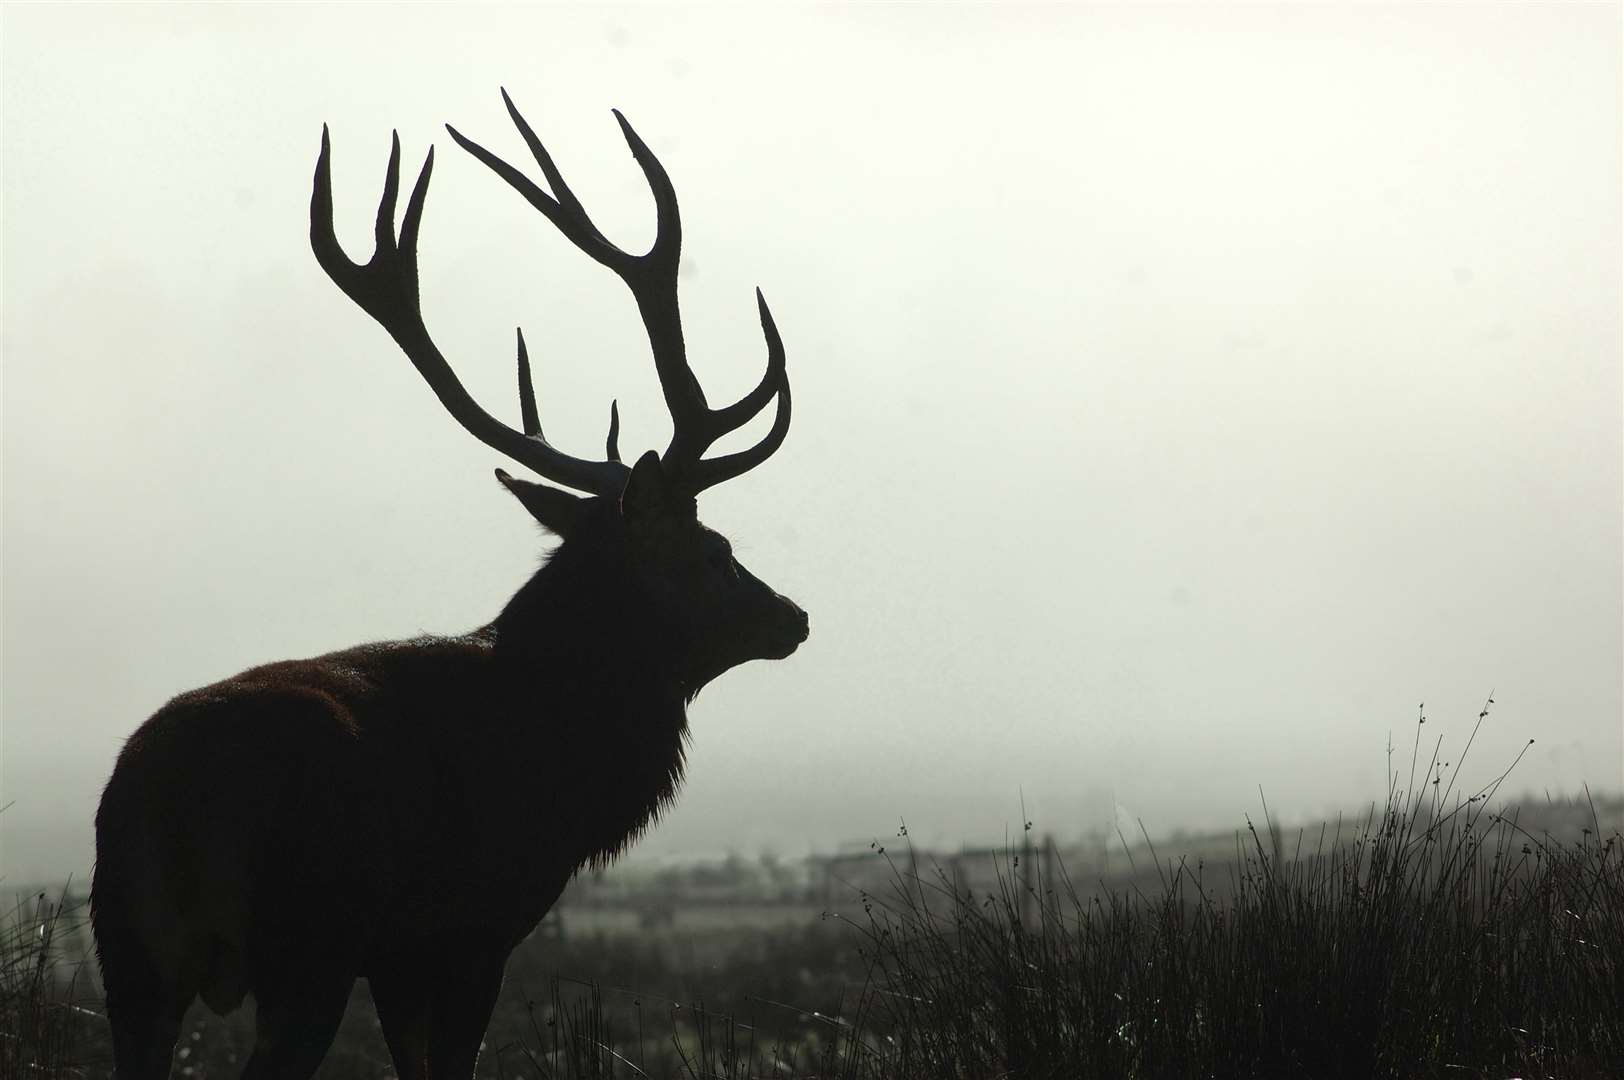 Wildland conservation charity the John Muir Trust has been given permission by NatureScot to cull deer out of season and at night on its Quinag Estate.